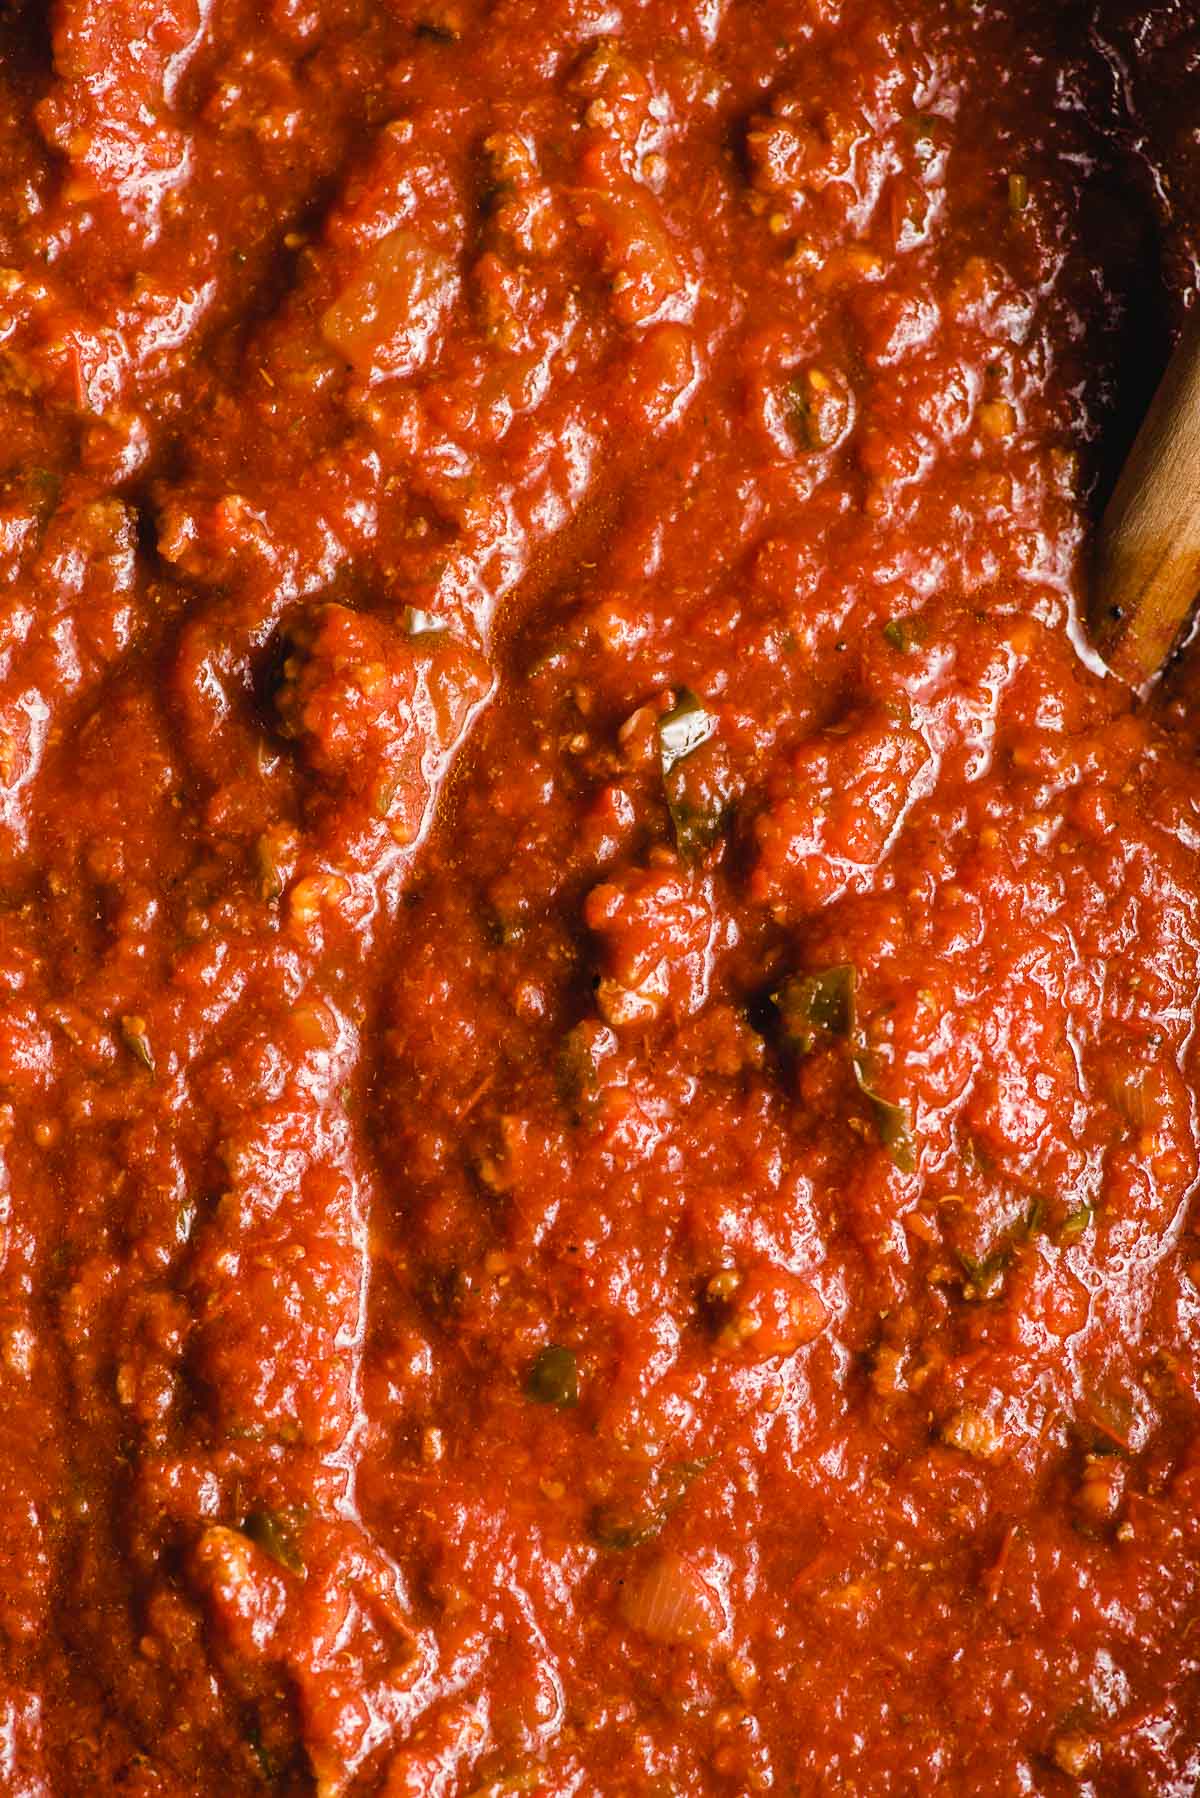 Slow cooker spaghetti sauce, up close.